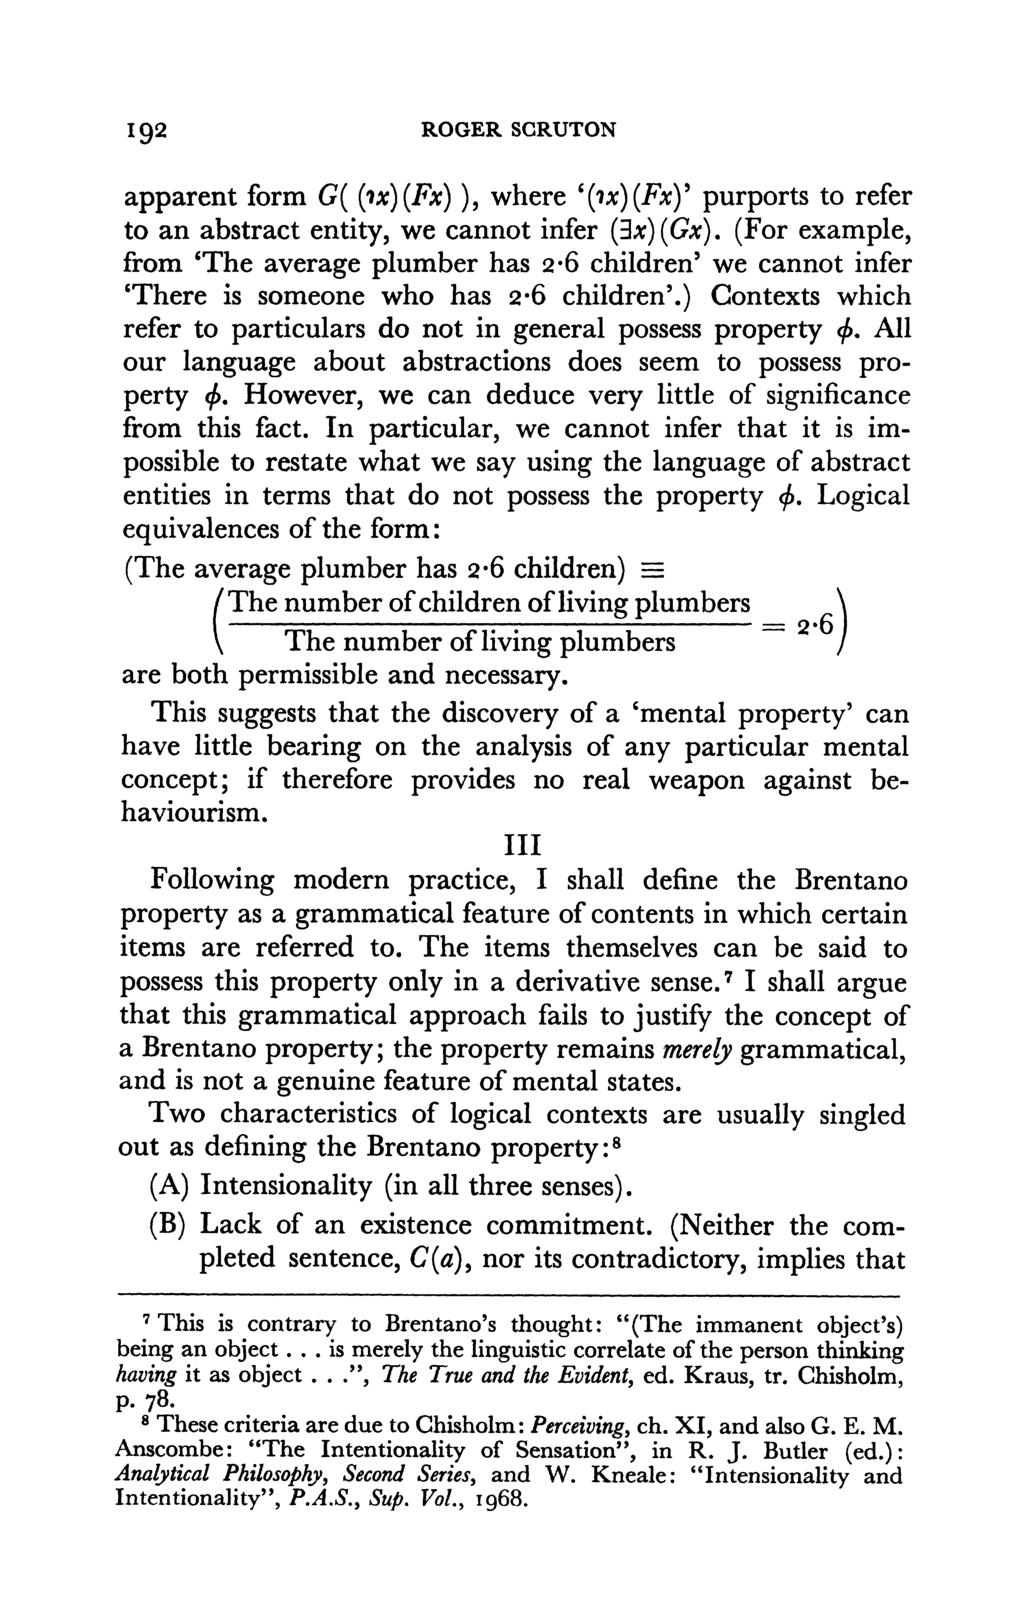 192 ROGER SCRUTON apparent form G( (ix)(ex)), where '(ix)(fx)' purports to refer to an abstract entity, we cannot infer (3x)(Gx).